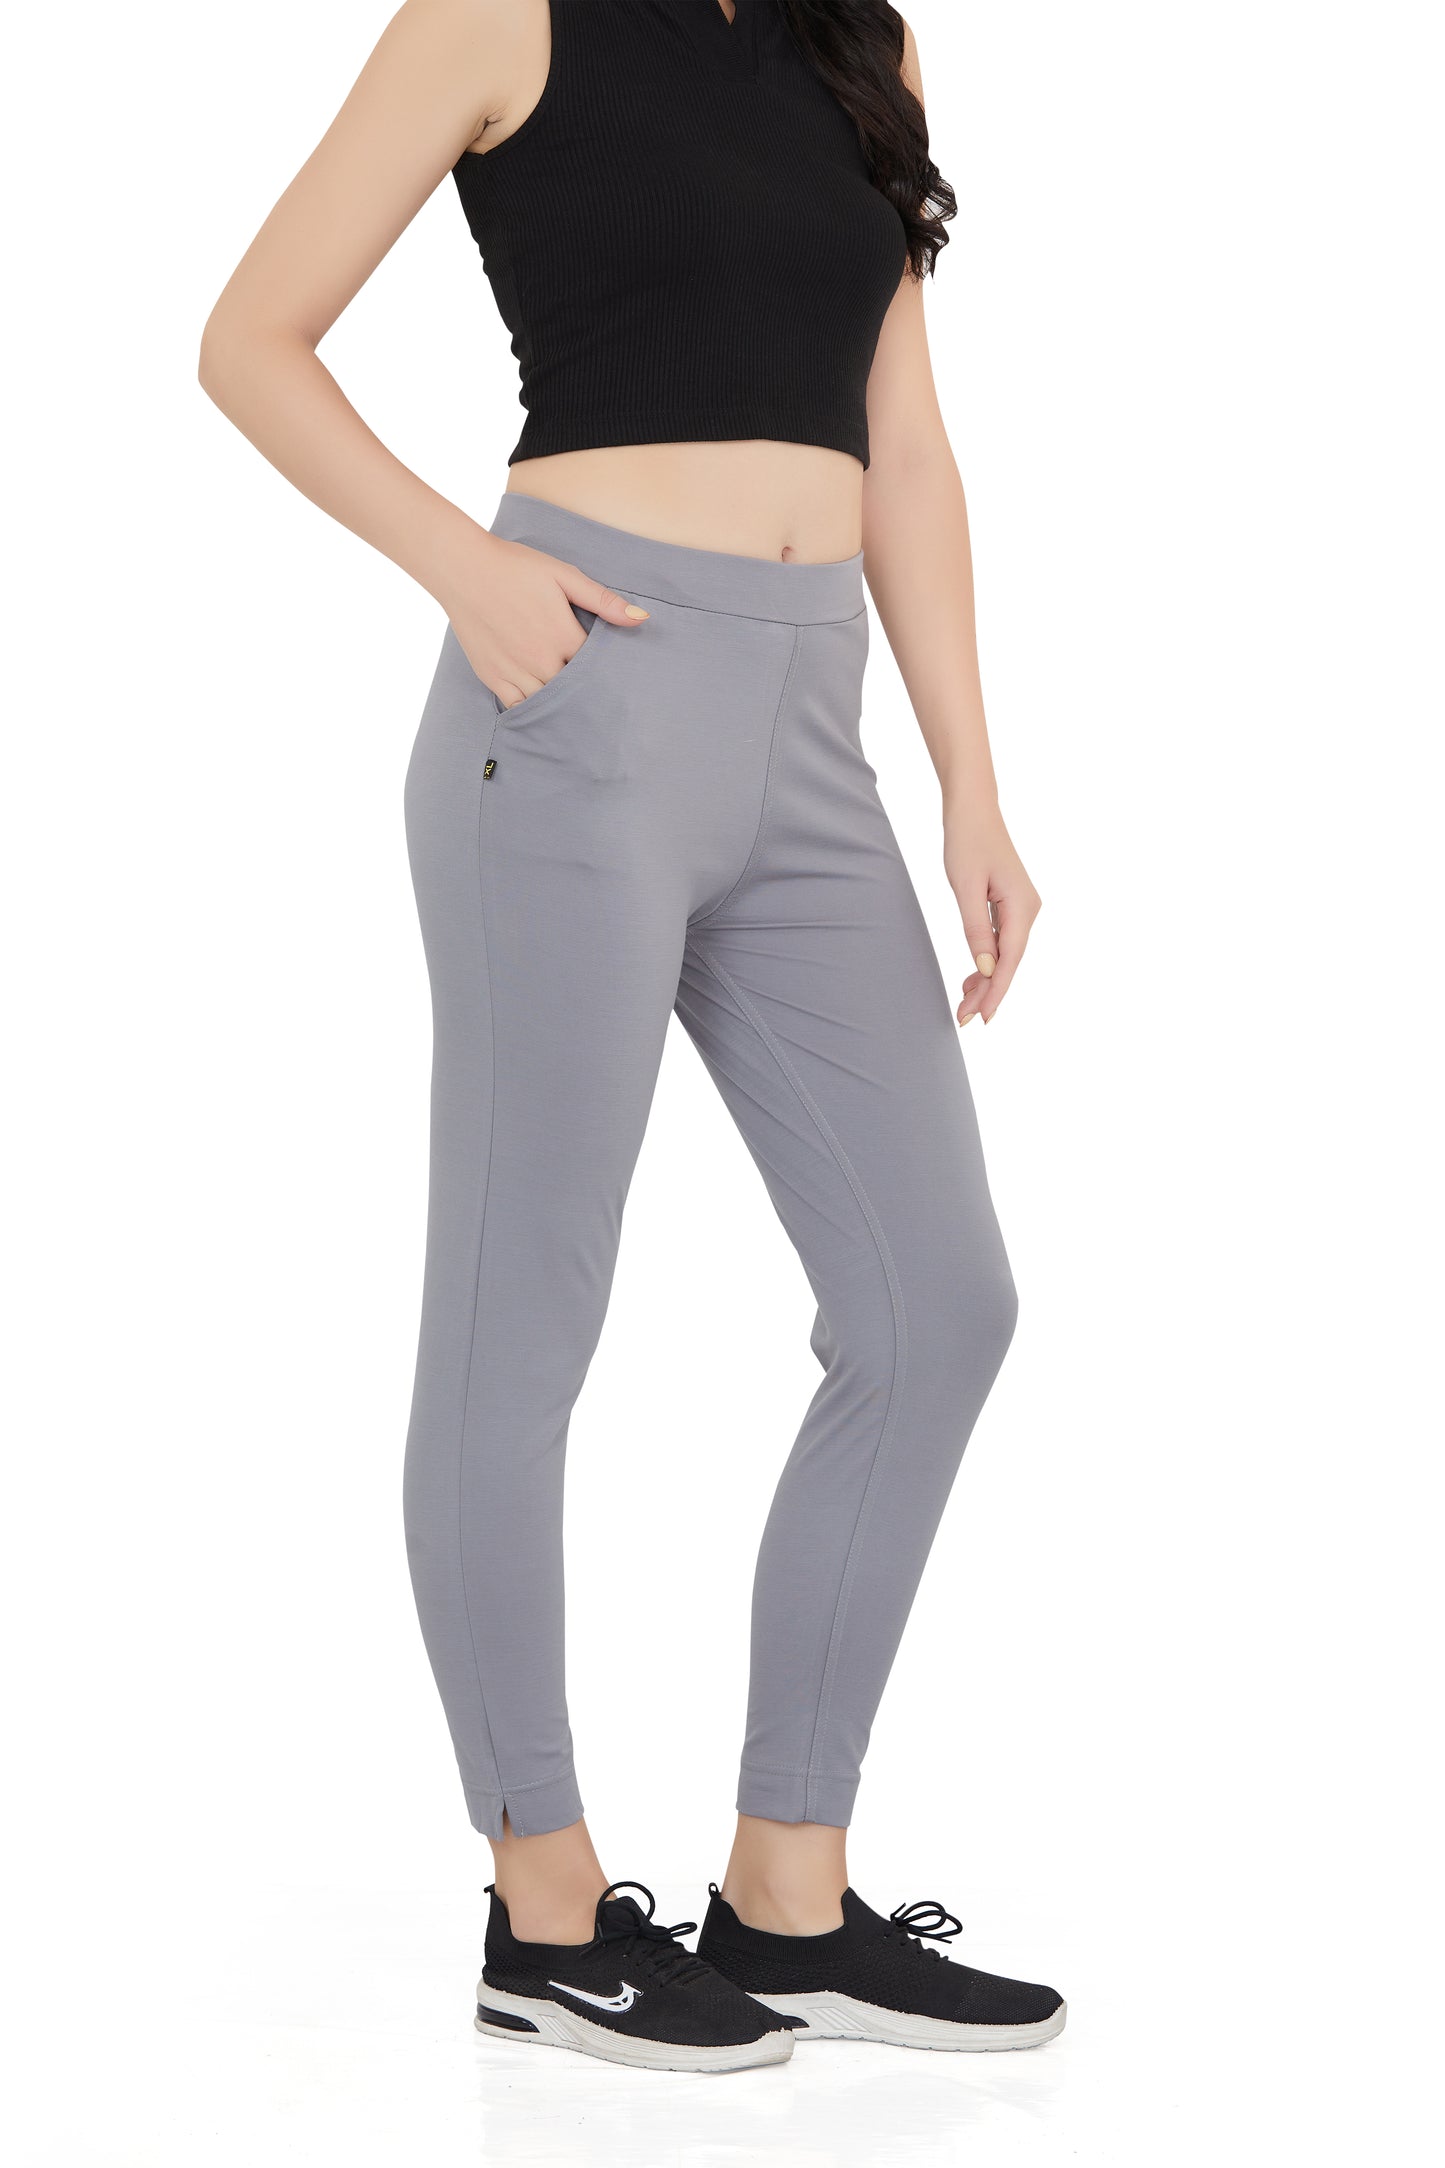 IMPORTED ULTIMATE LIGHT GREY PANT